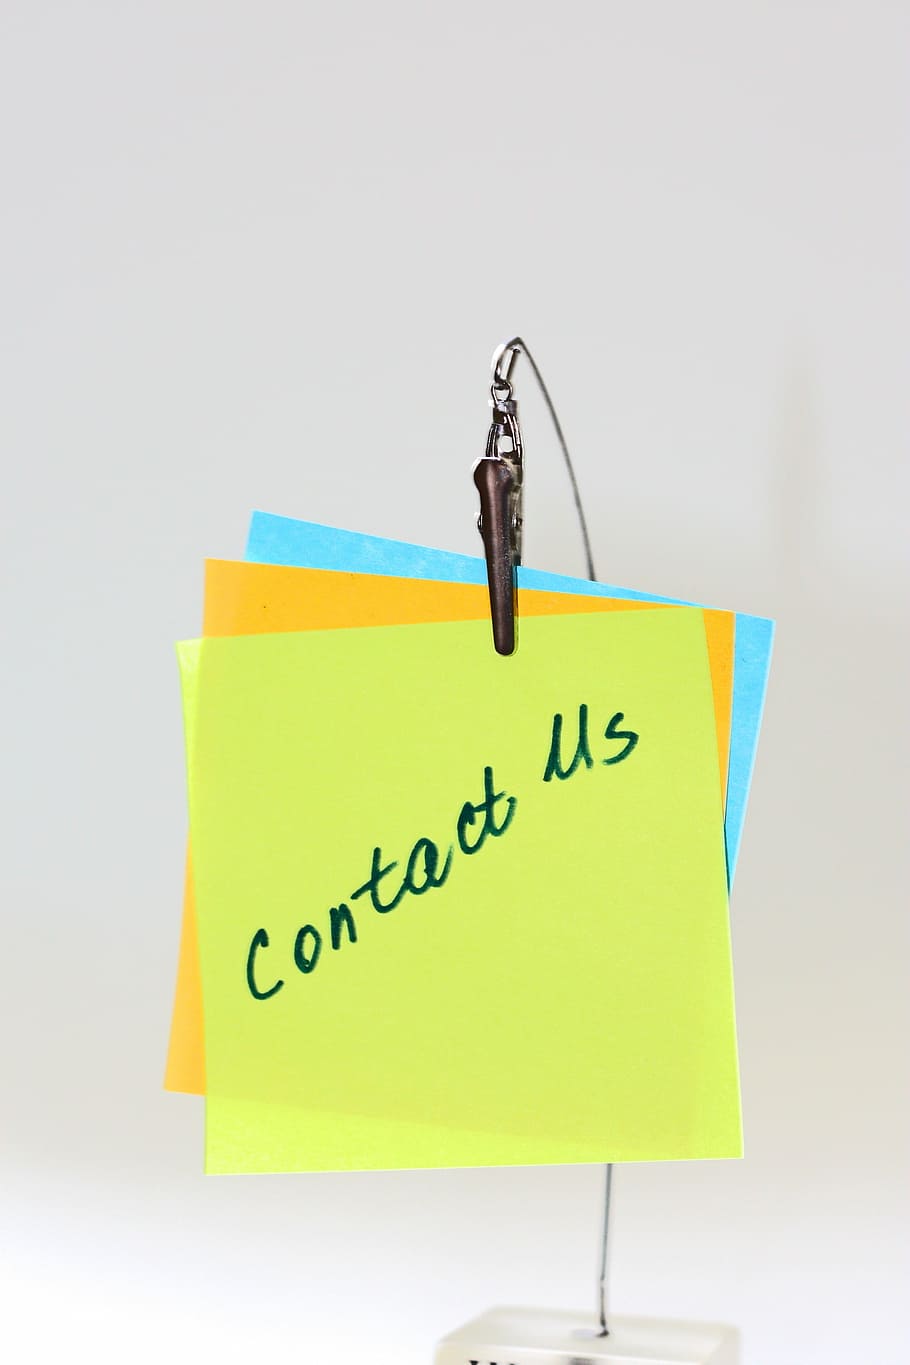 contact us text on sticky note, e-mail, inquiry, call, help, office